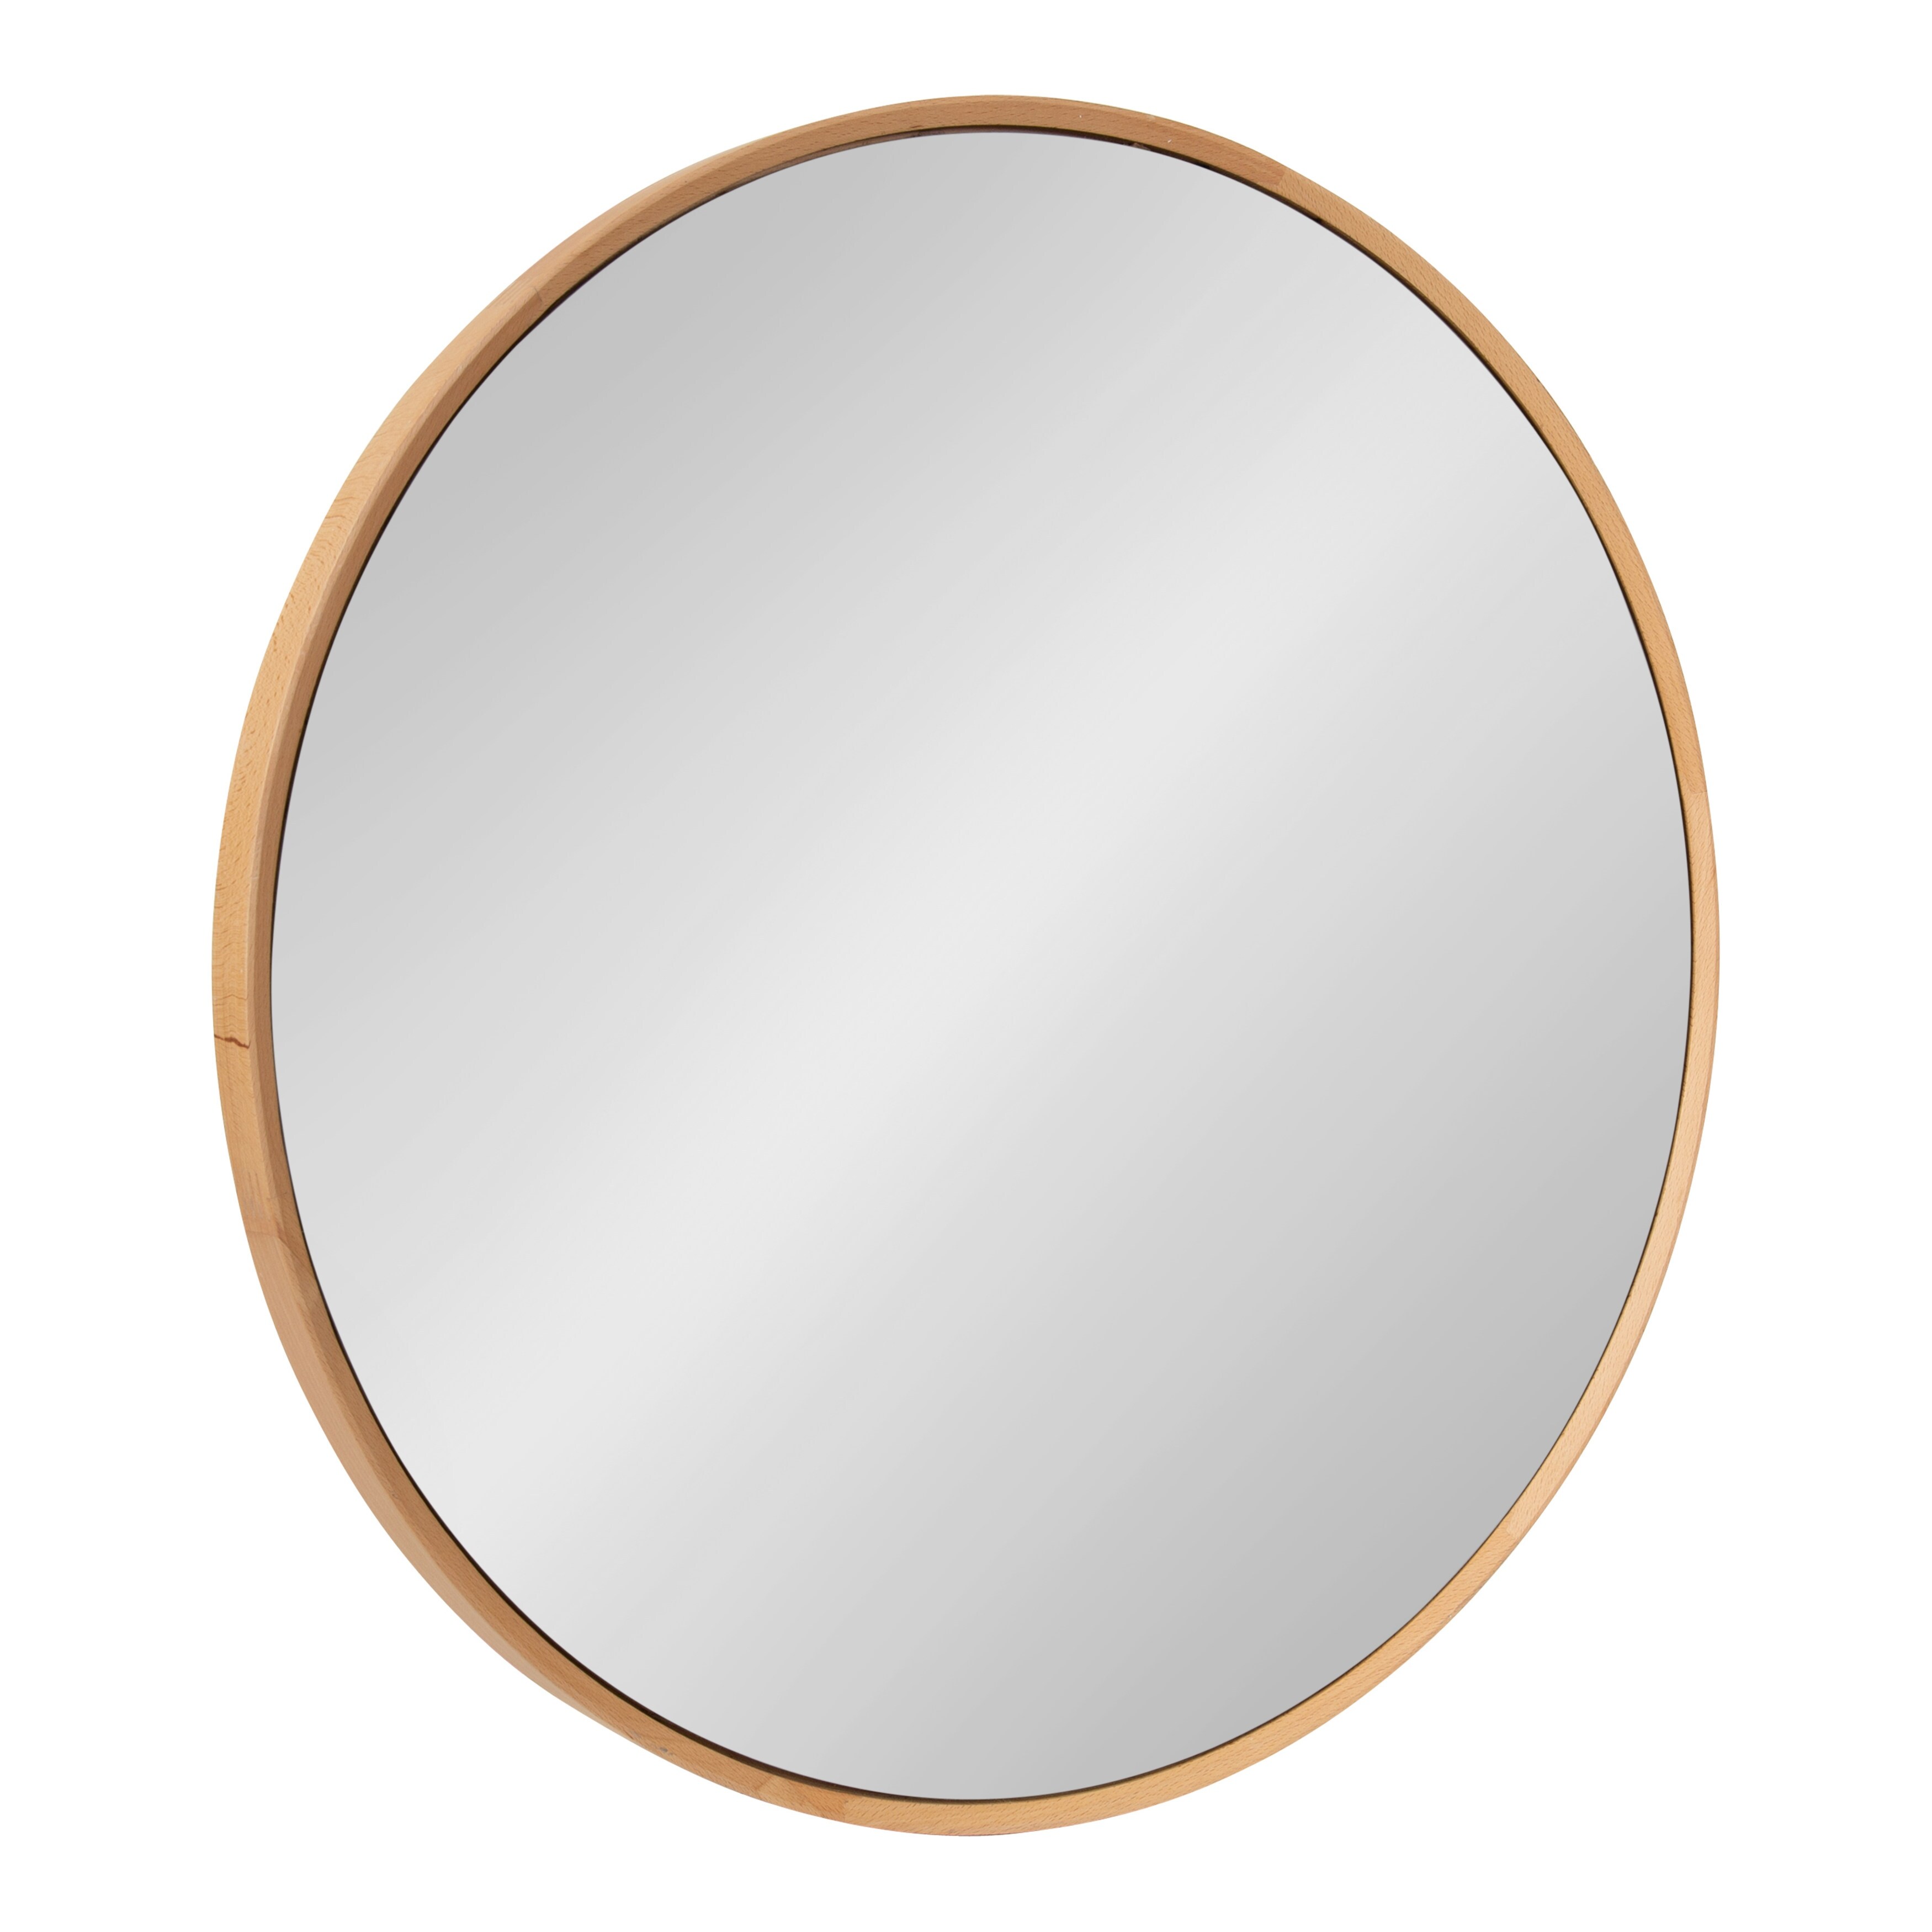 ROUND MIRRORS THAT MAKE A STATEMENT! - CITRINELIVING